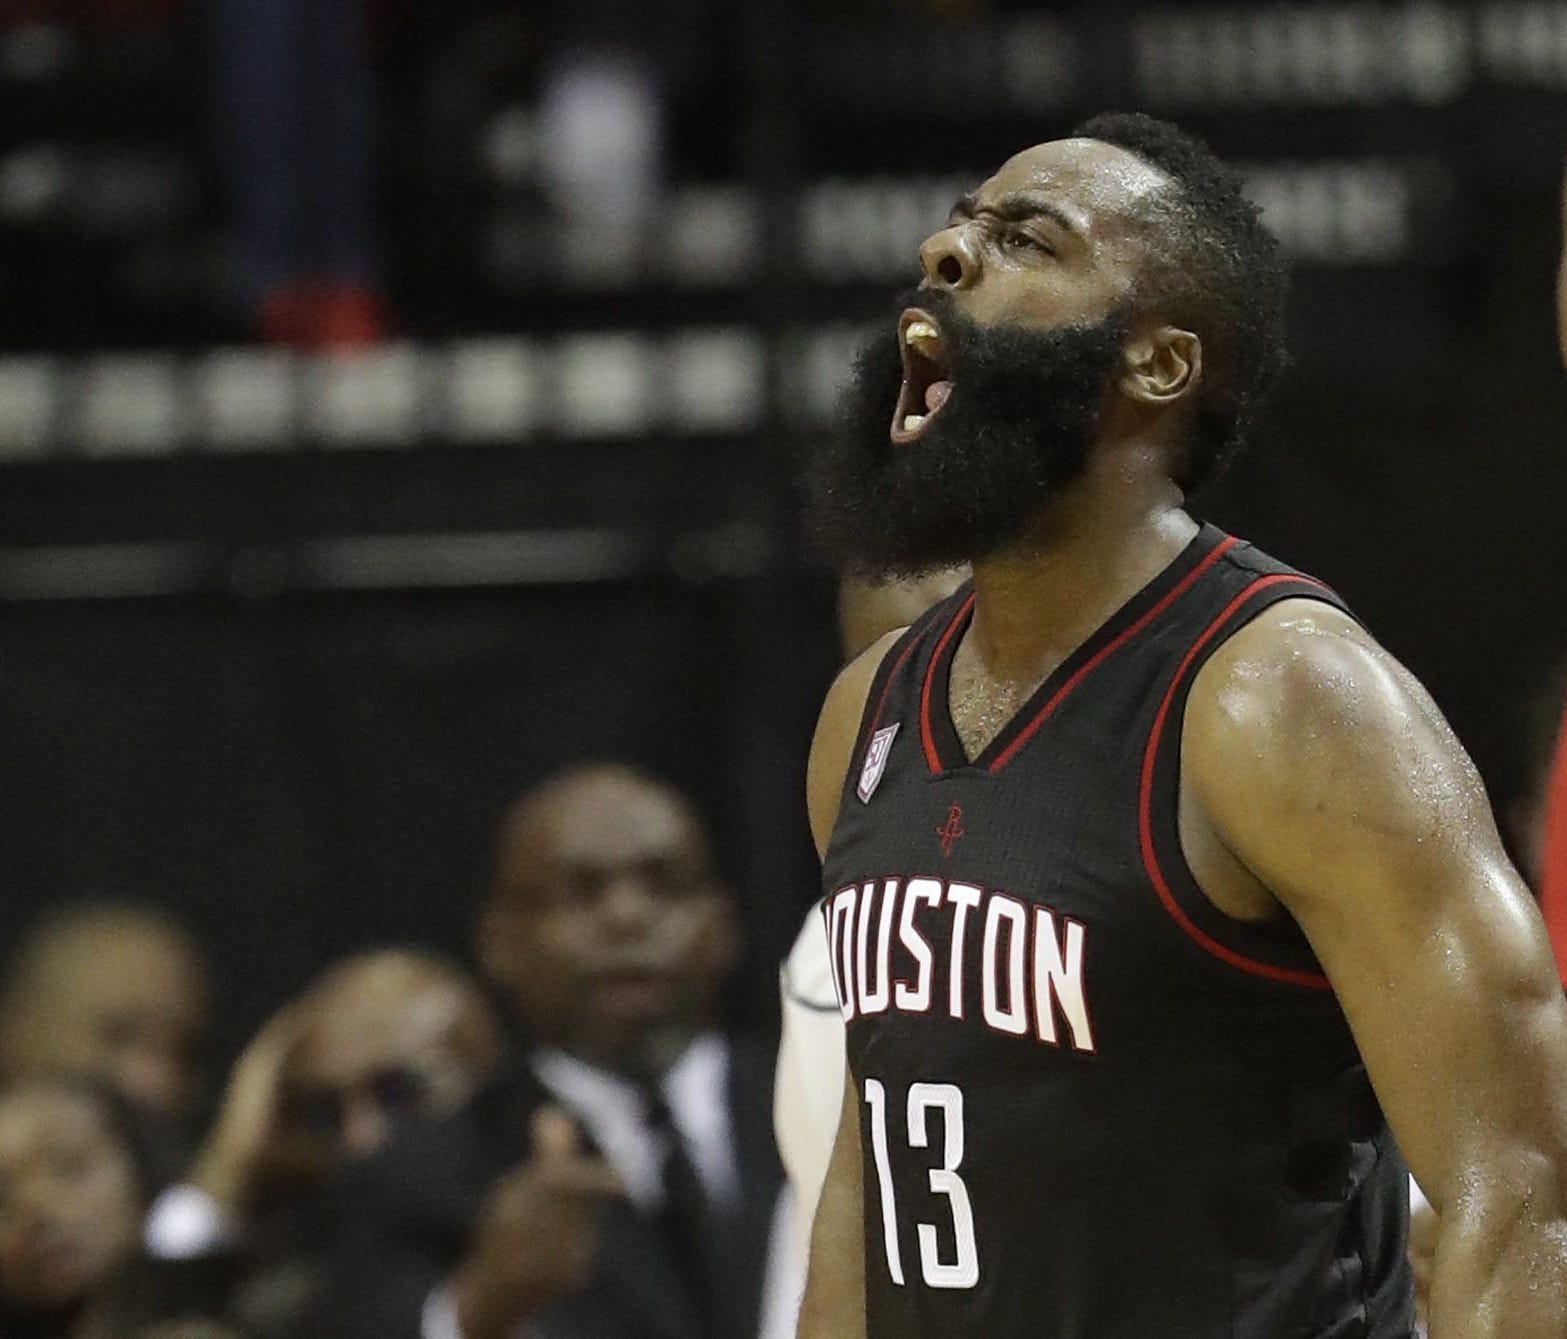 Houston Rockets' James Harden yells after a Oklahoma City Thunder turnover during the second half in Game 1 of an NBA basketball first-round playoff series, Sunday, April 16, 2017, in Houston.